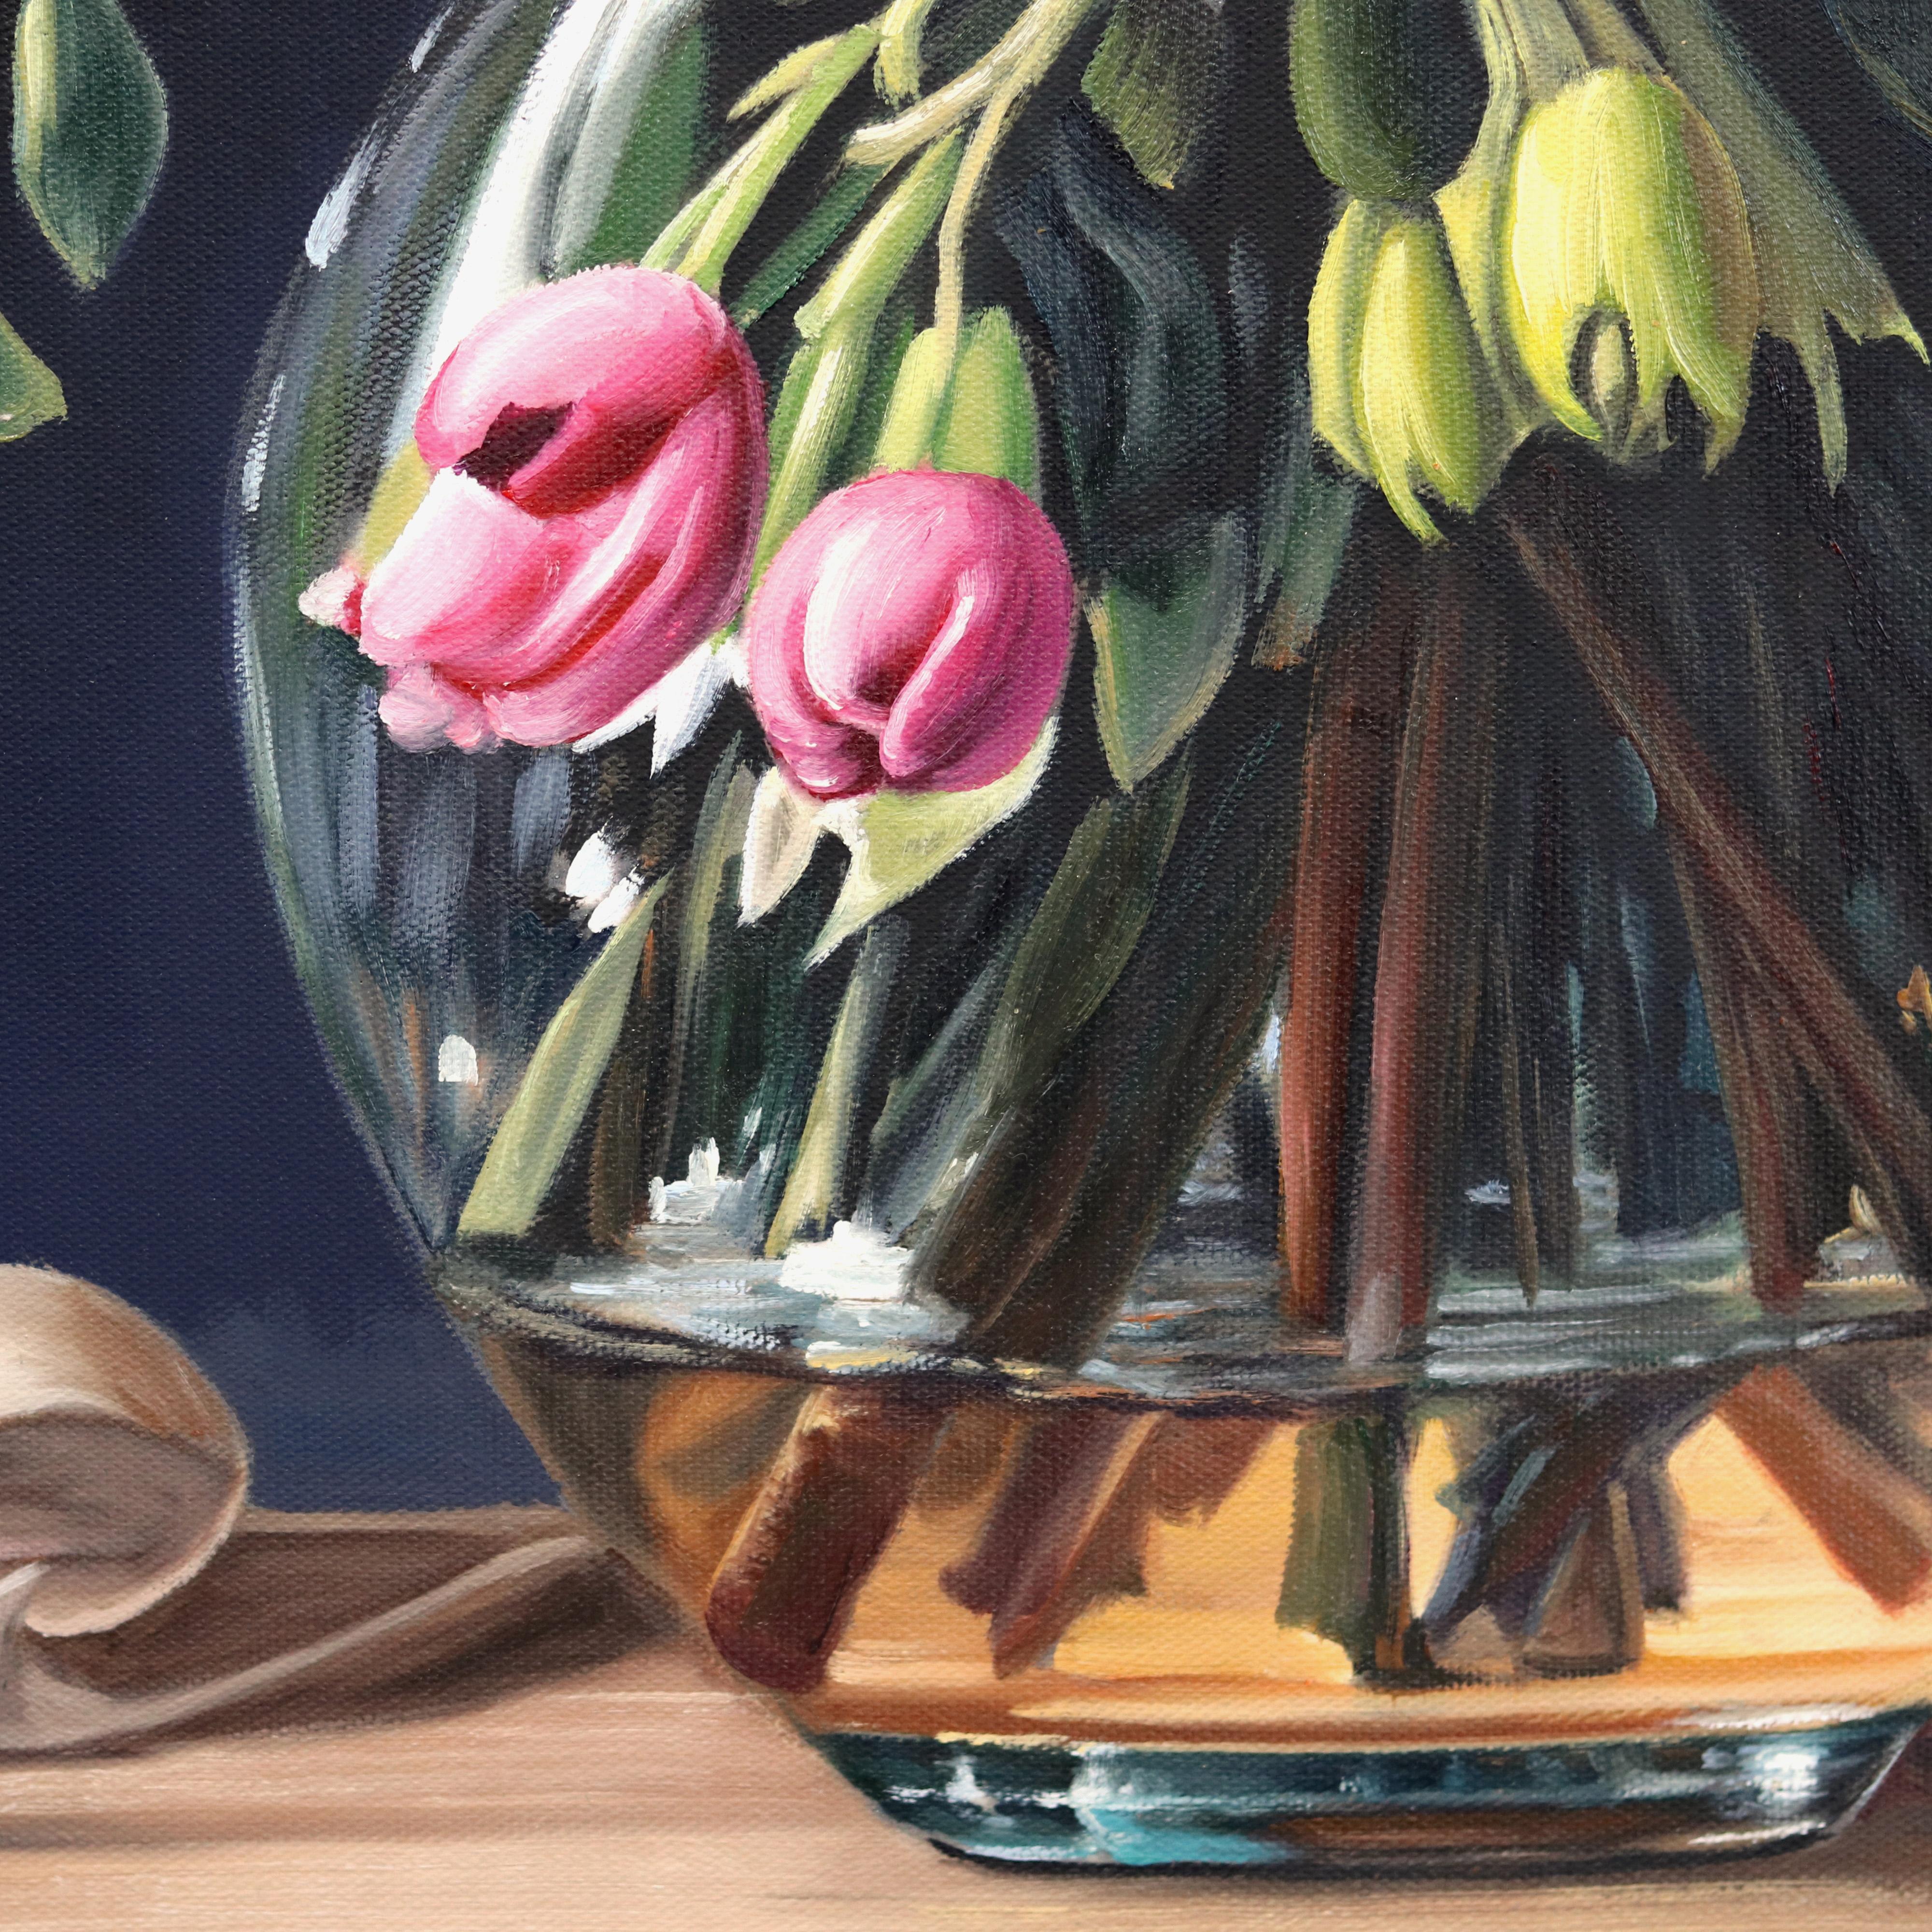 I Have Only My Dreams - Hyperrealist Botanical Floral Still Life Oil Painting 7